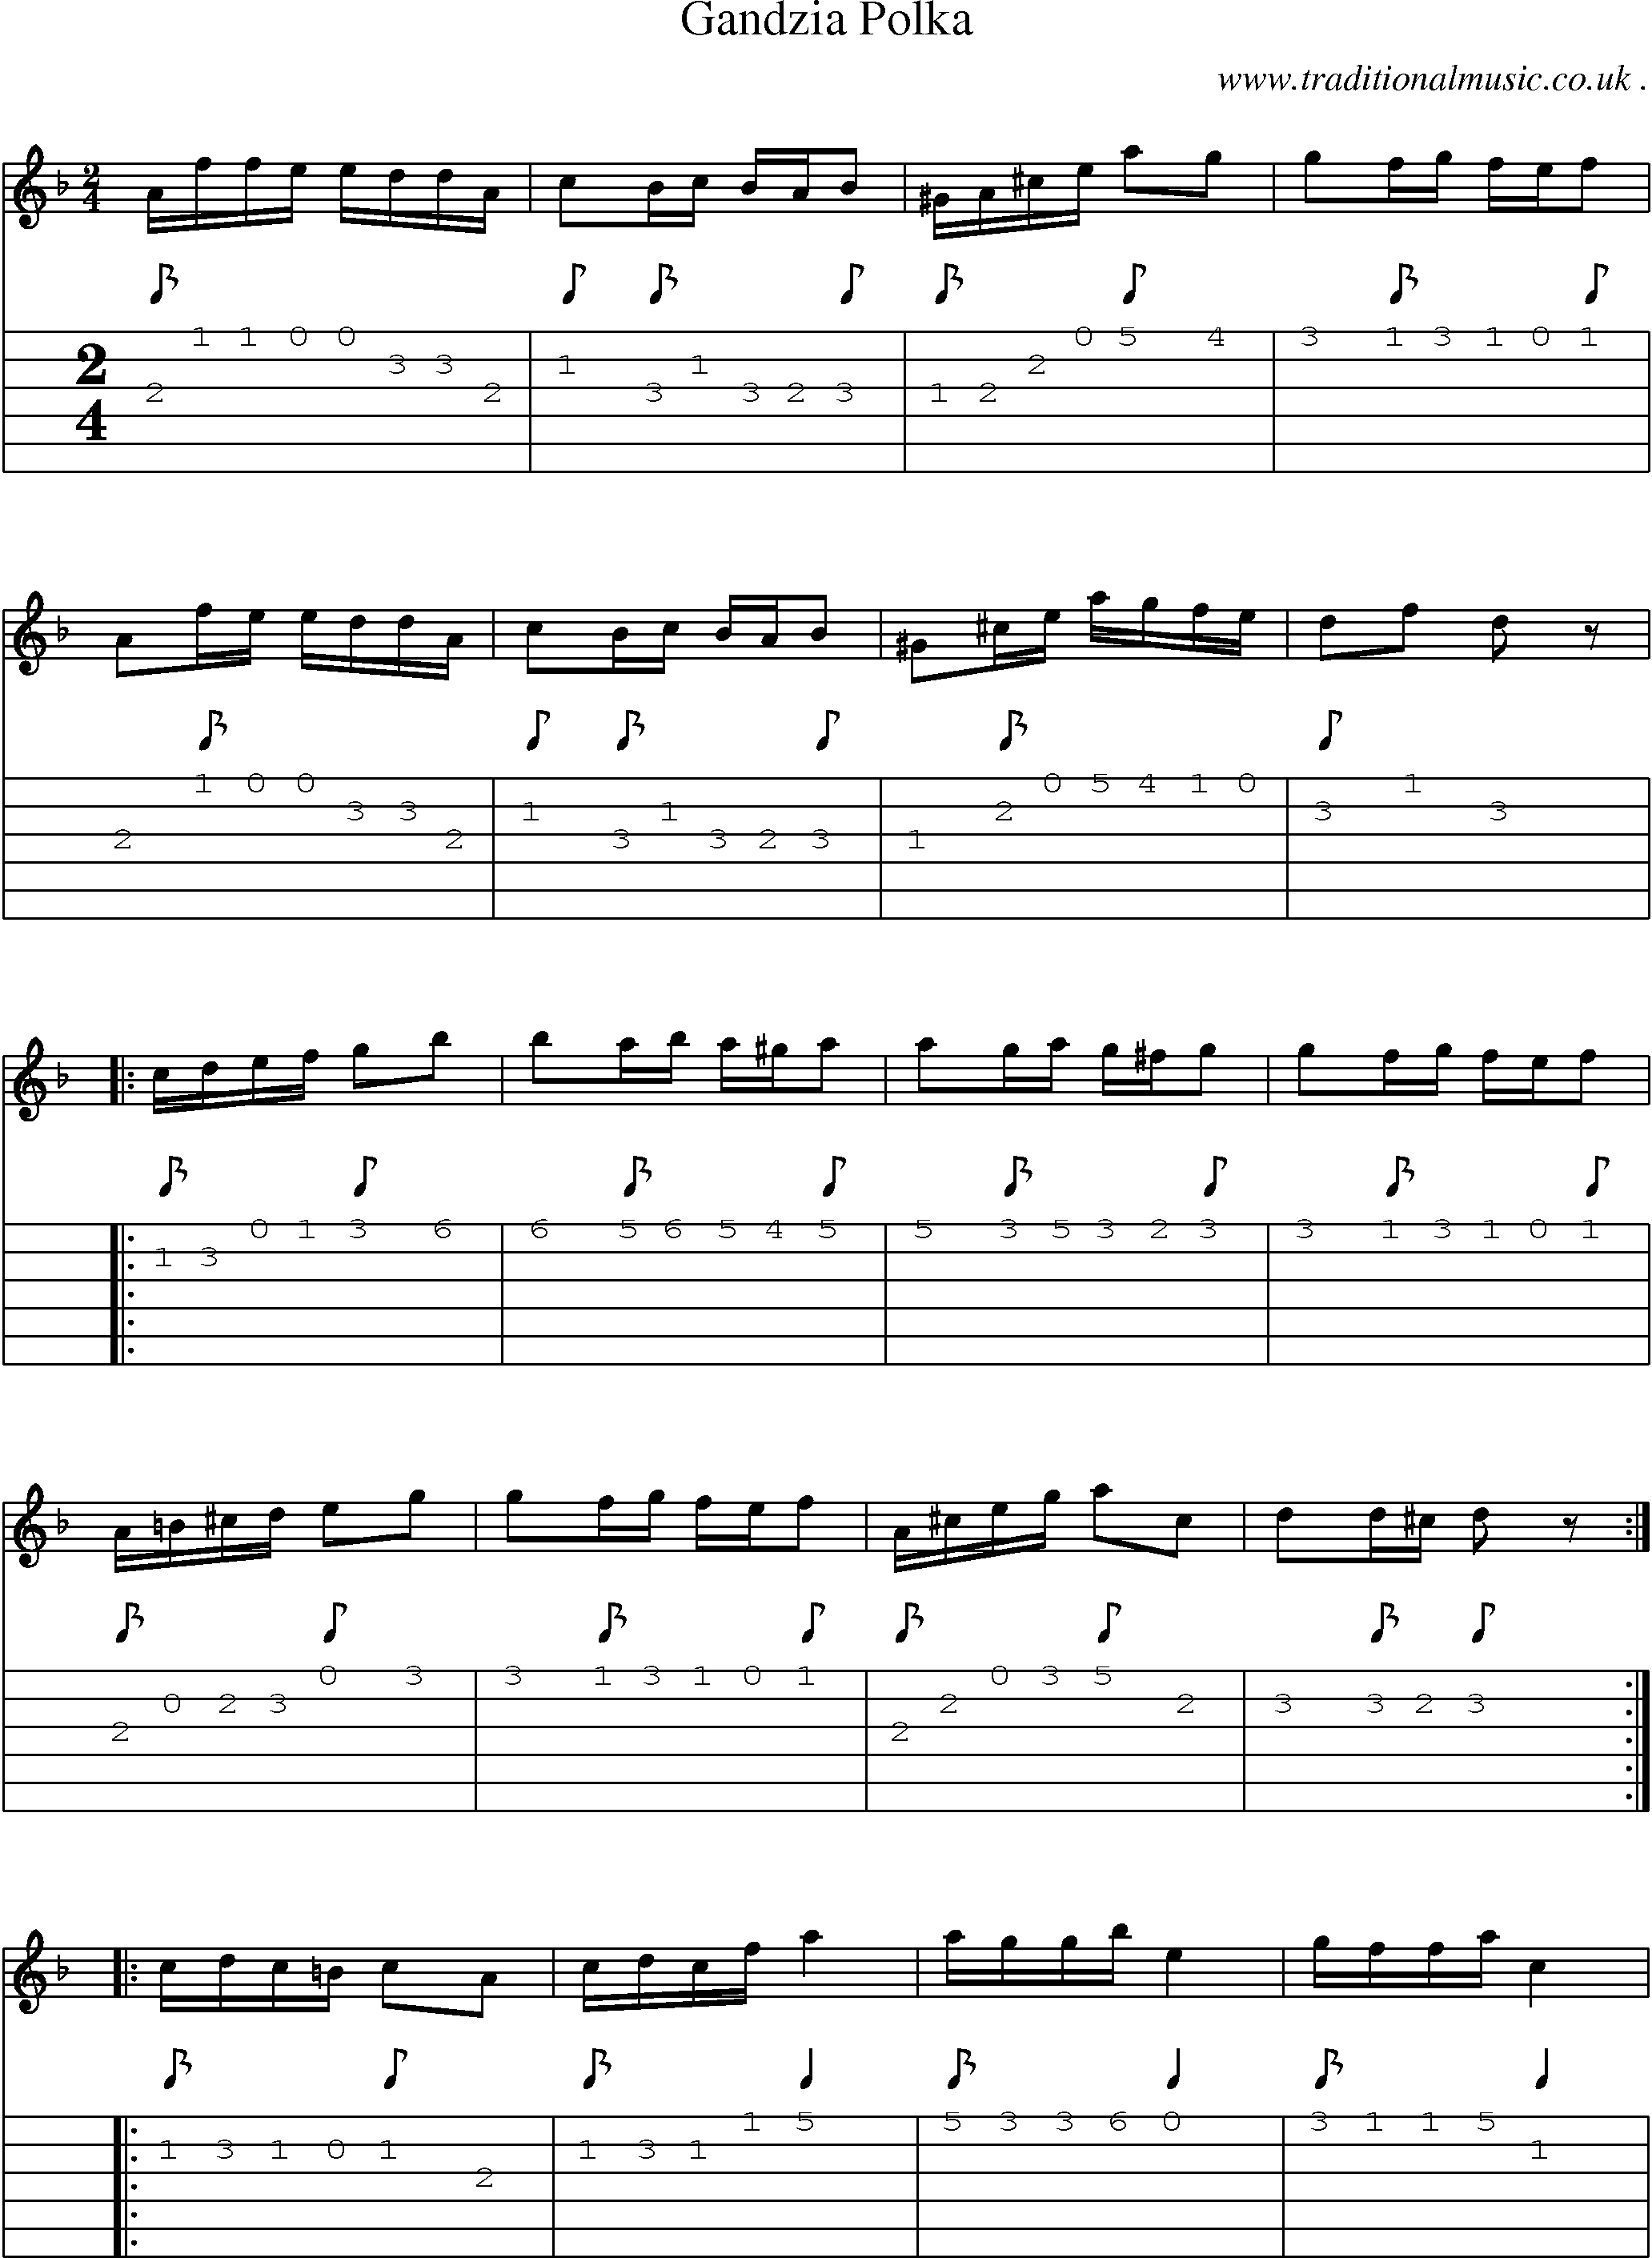 Music Score and Guitar Tabs for Gandzia Polka